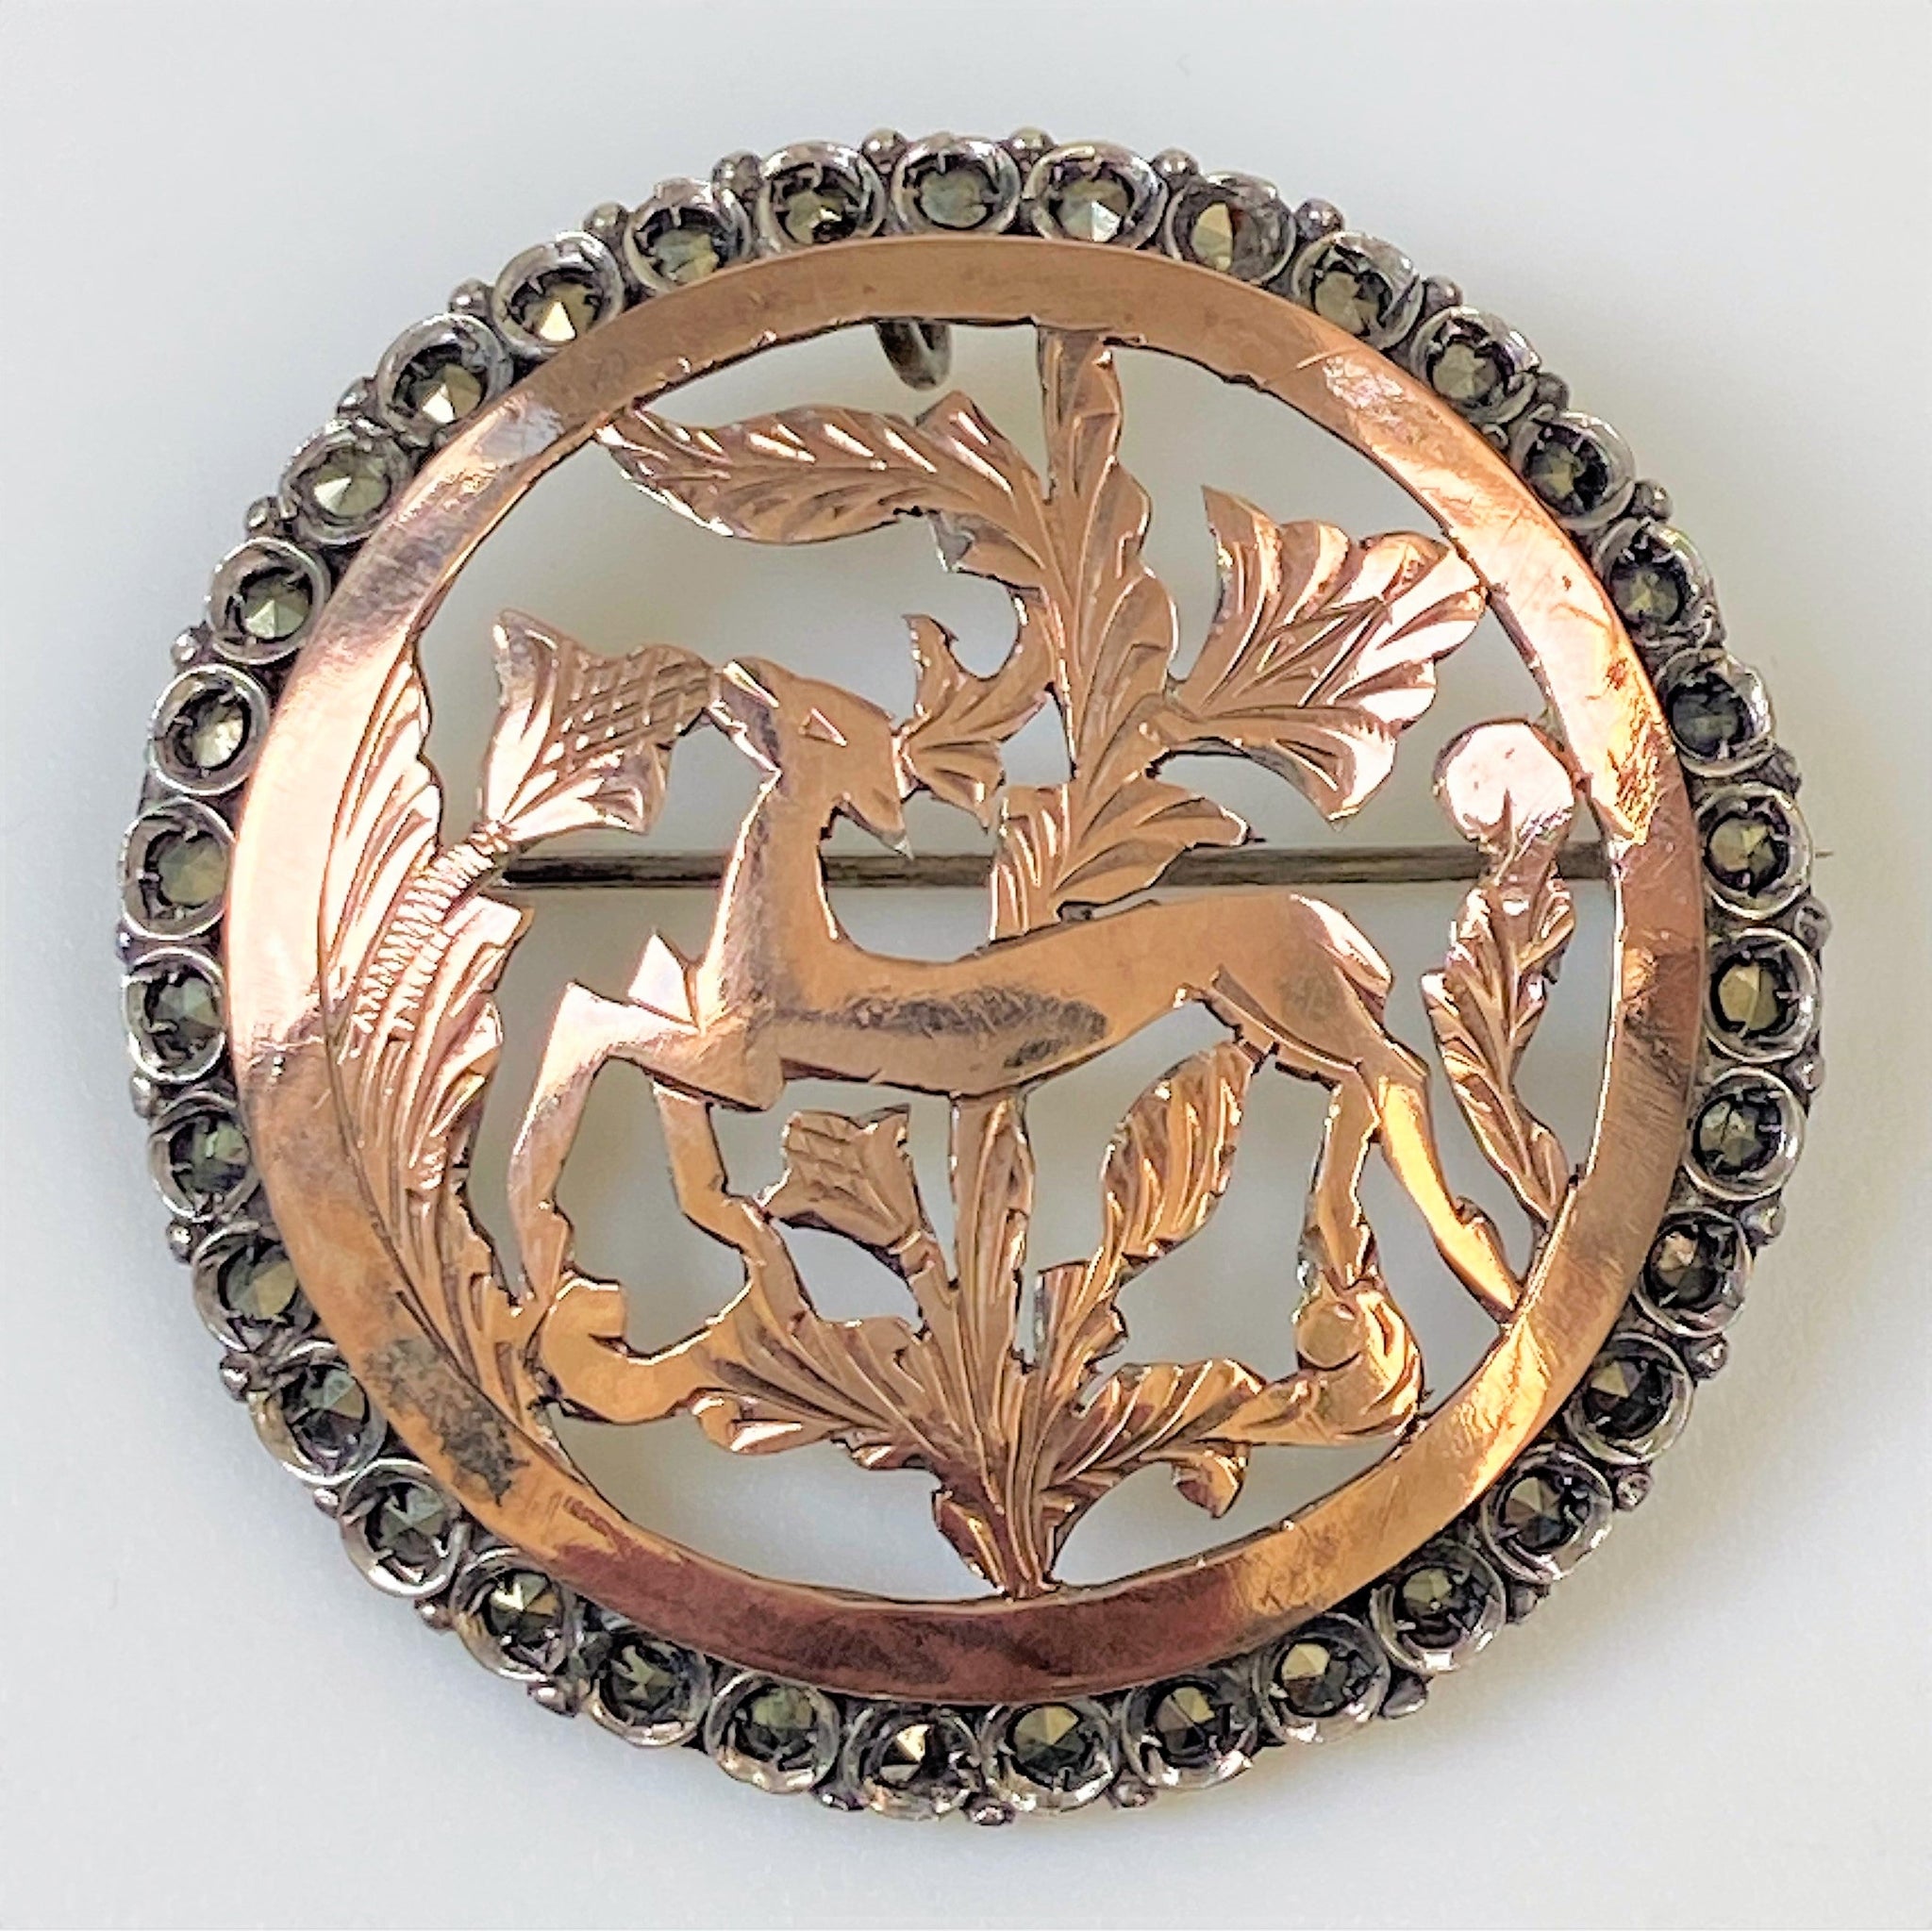 Vintage Silver and Gilded “Faun among Flowers” Brooch